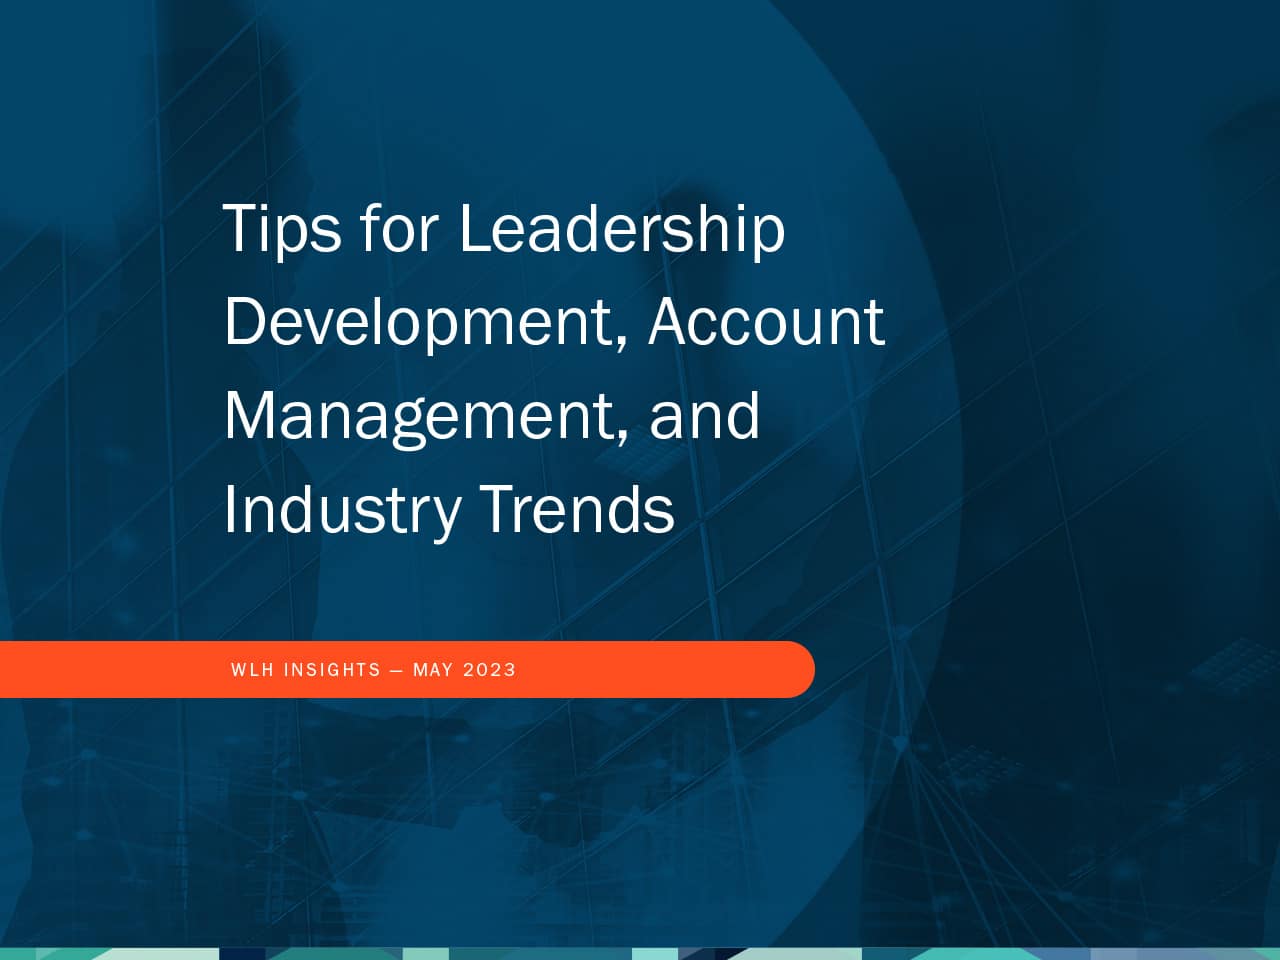 Tips for Leadership Development, Account Management, and Industry Trends